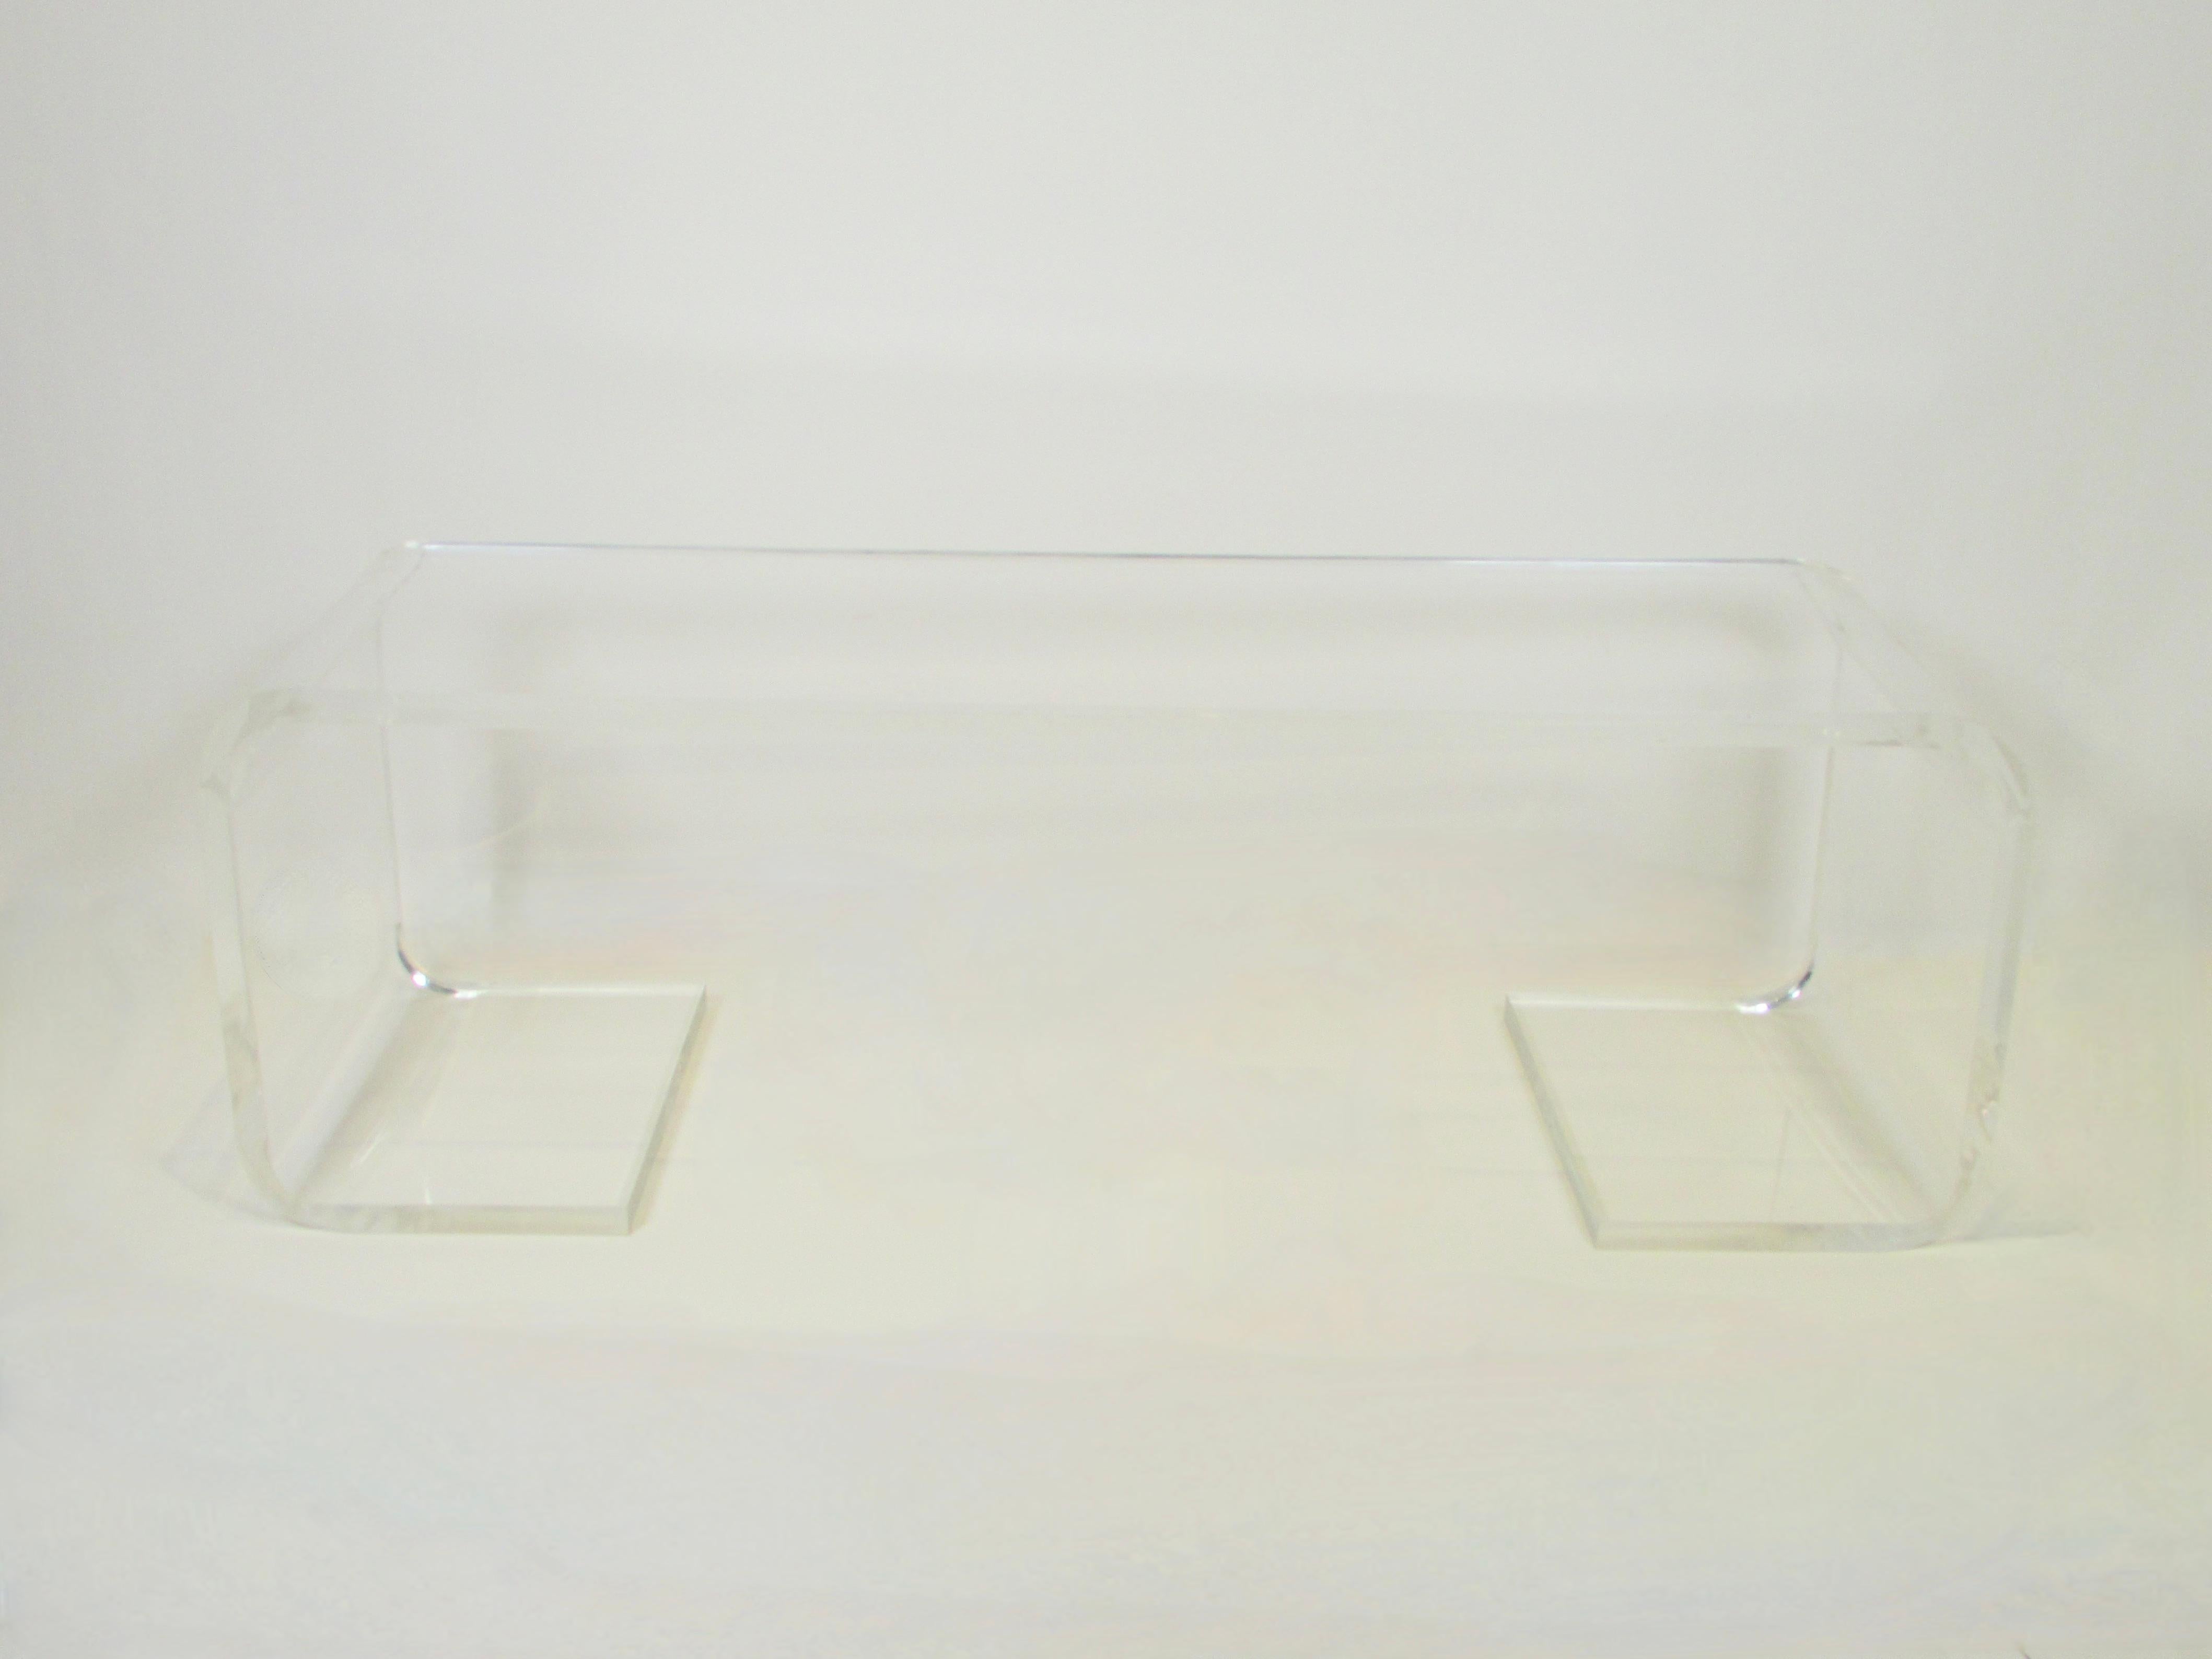 Large one inch thick lucite bench or coffee table . Flat slab top rolls down either side and along the floor . Recently polished very little if any evidence of scratching no nicks . Cleanest piece of Lucite I have had in a long time .  Images really